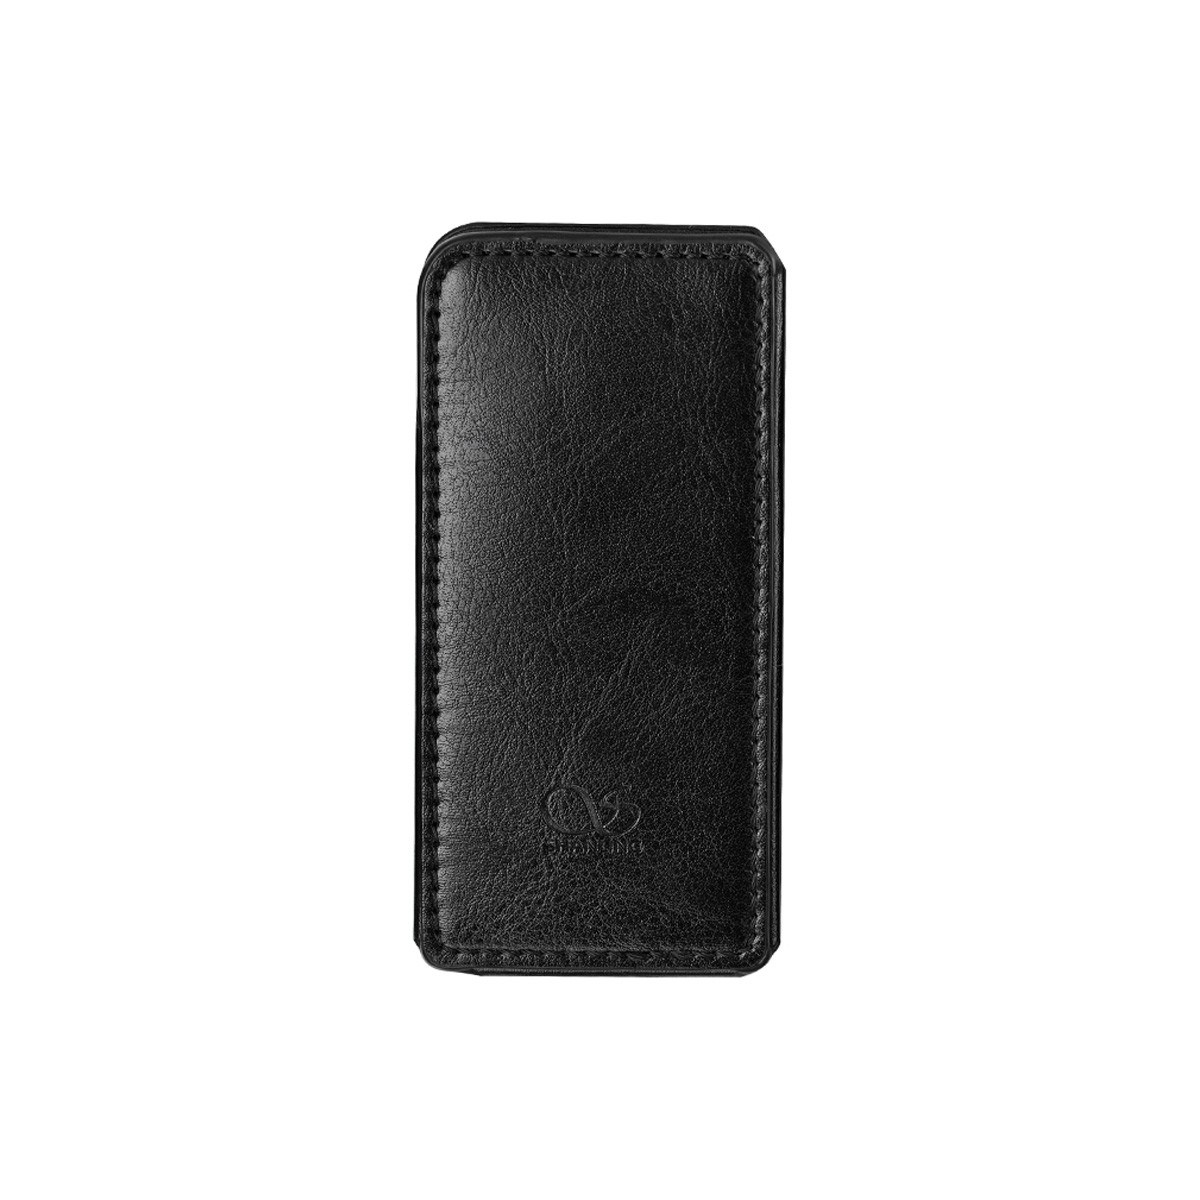 SHANLING Leather Cover for Shanling M3S DAP Black